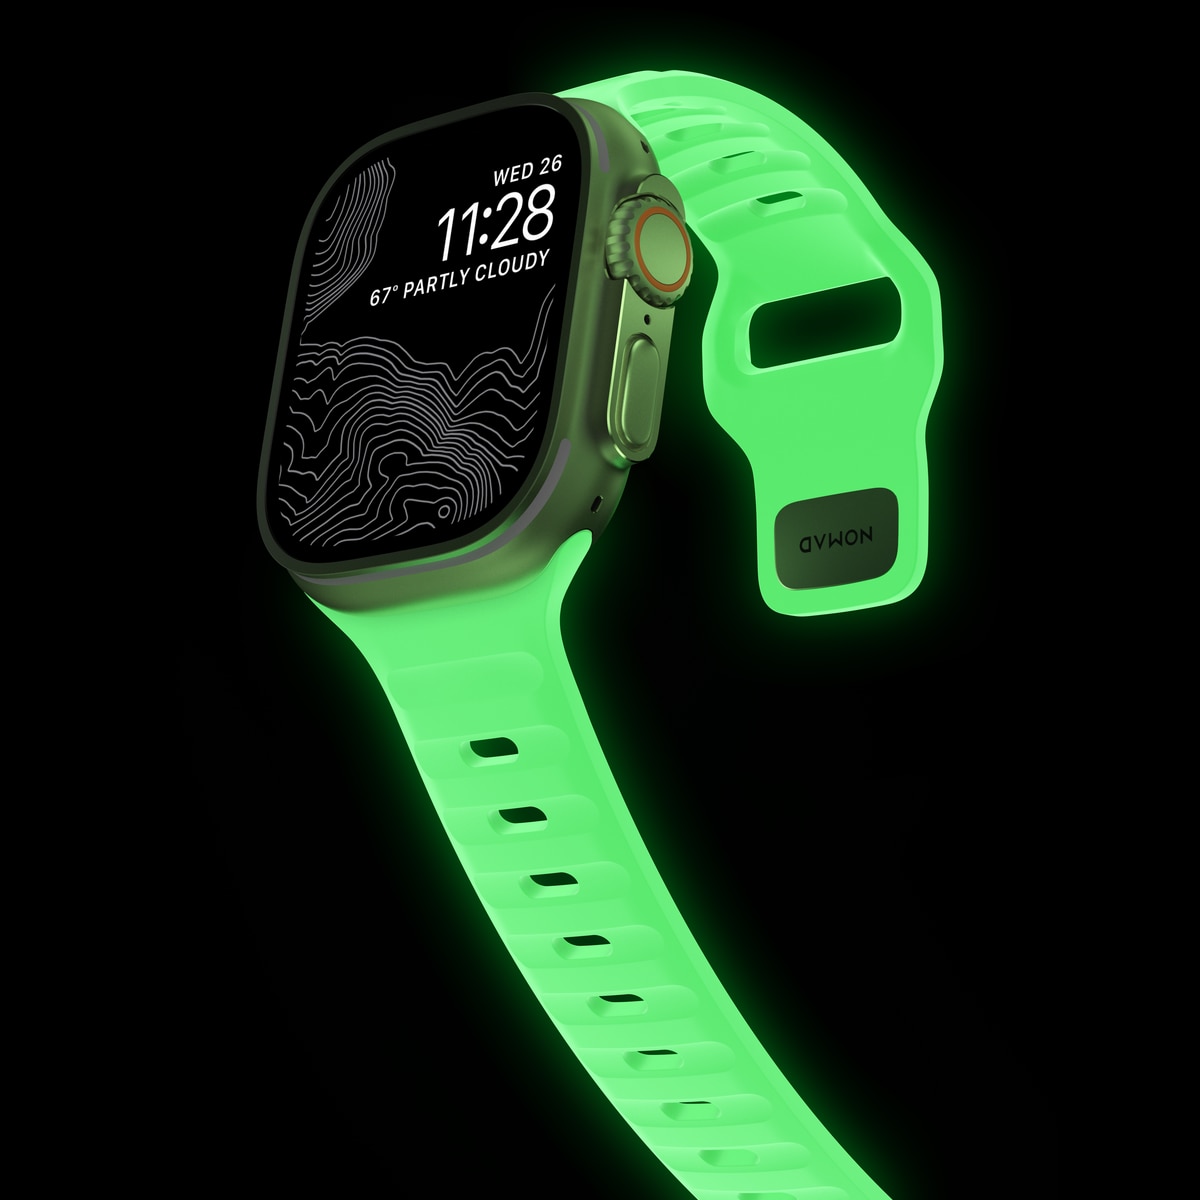 Sport Band Apple Watch 42mm Glow 2.0 - Limited edition